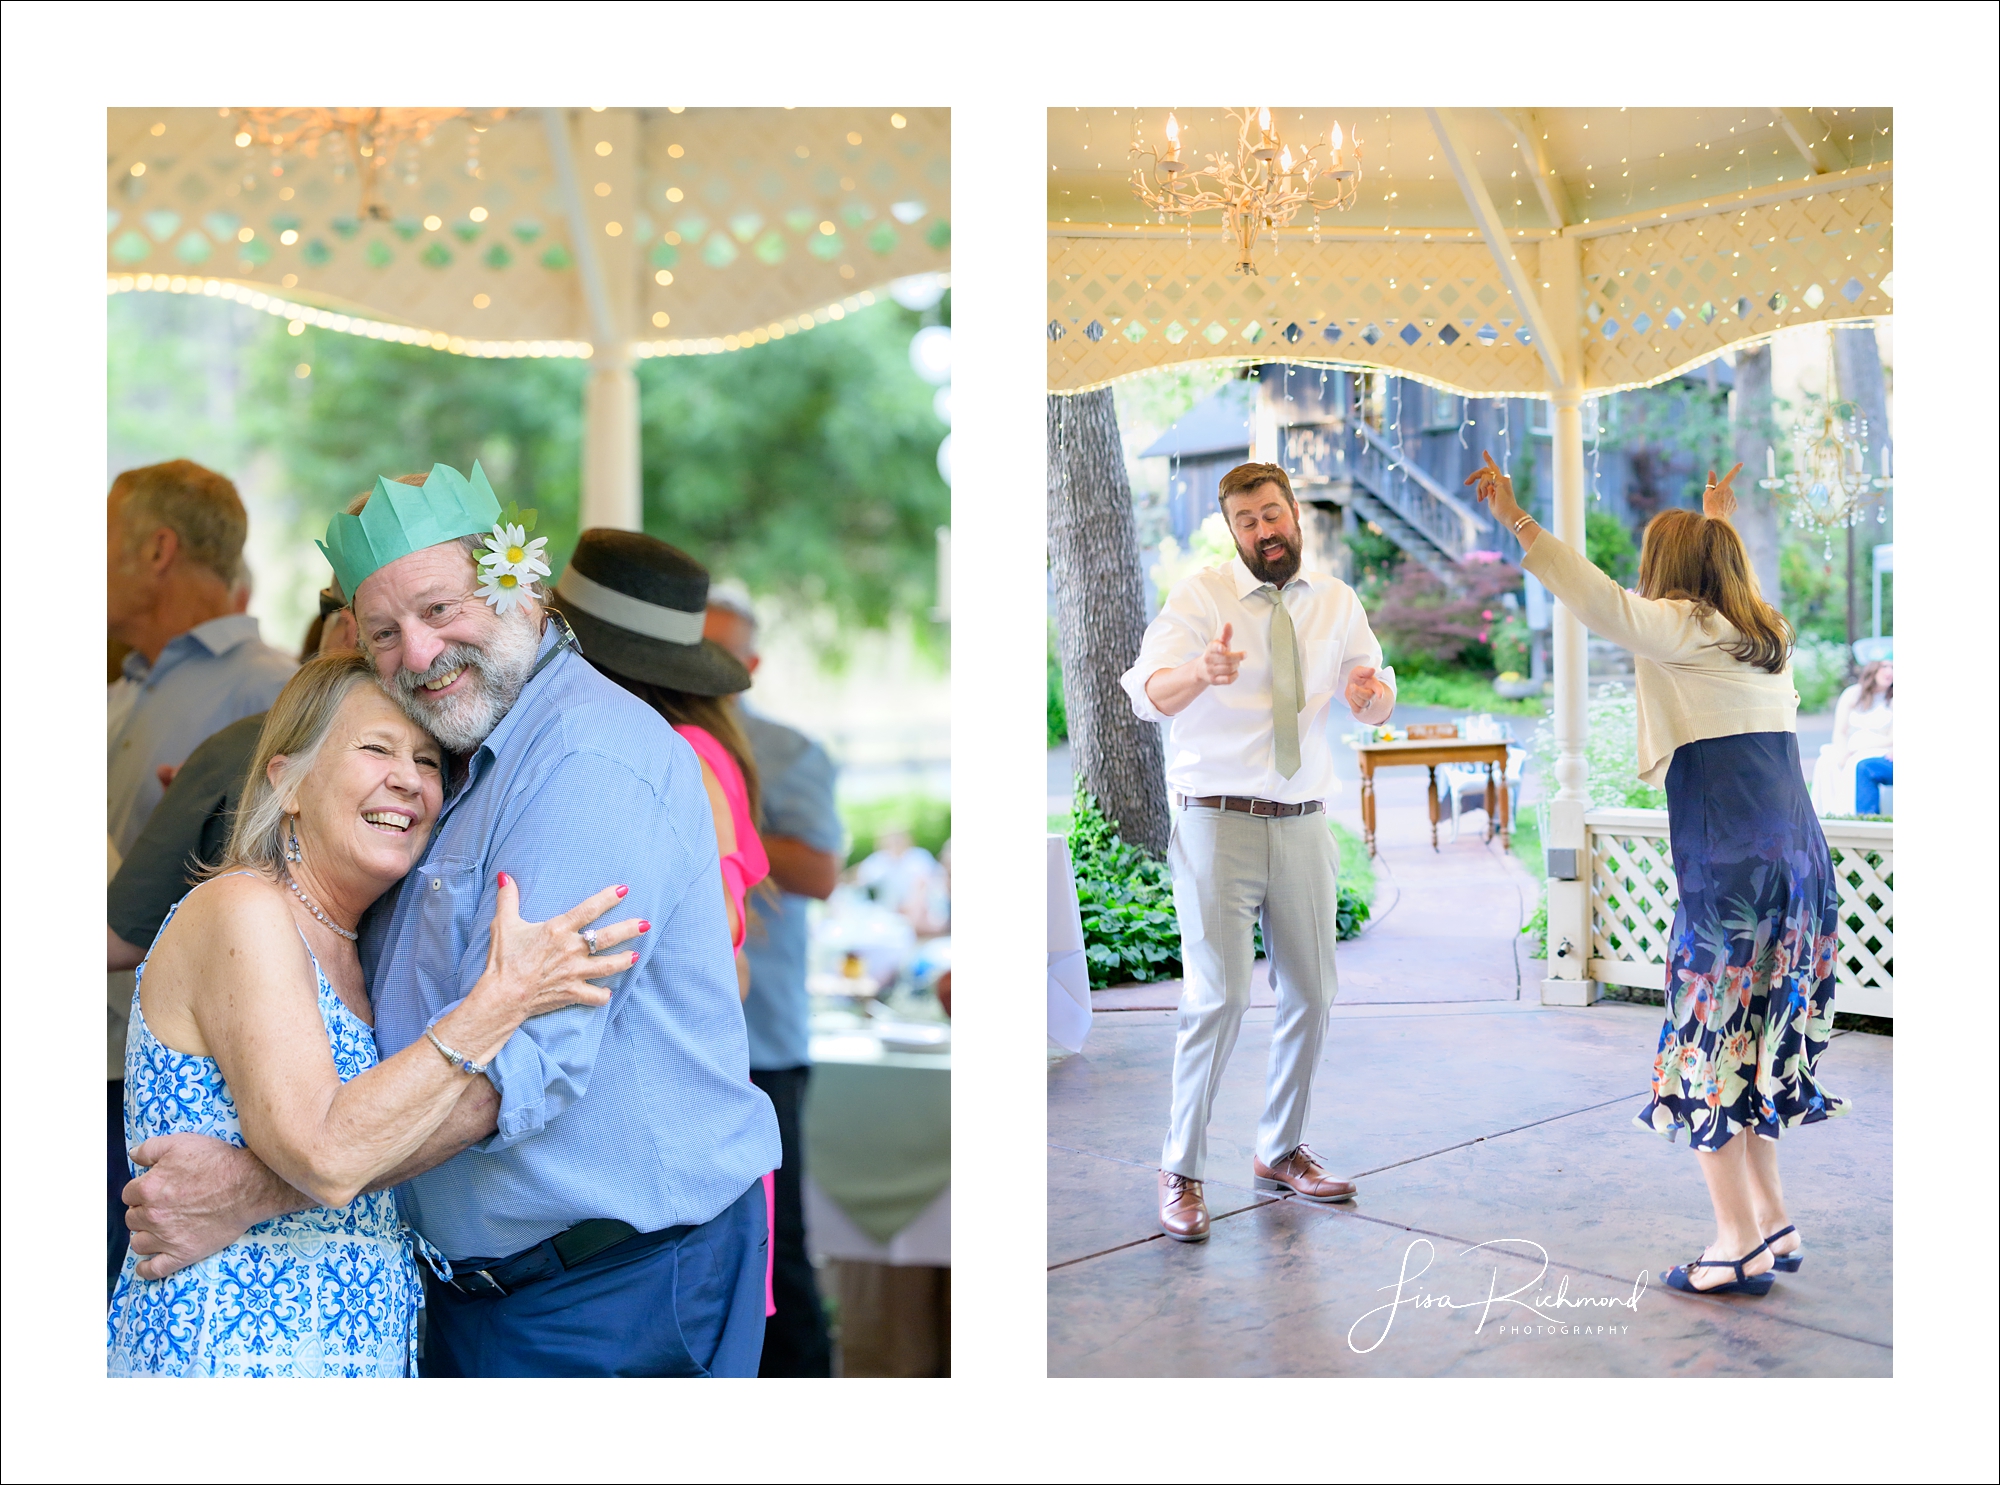 Ashlie and Erik <br> Joining the conga line at Fausel Ranch